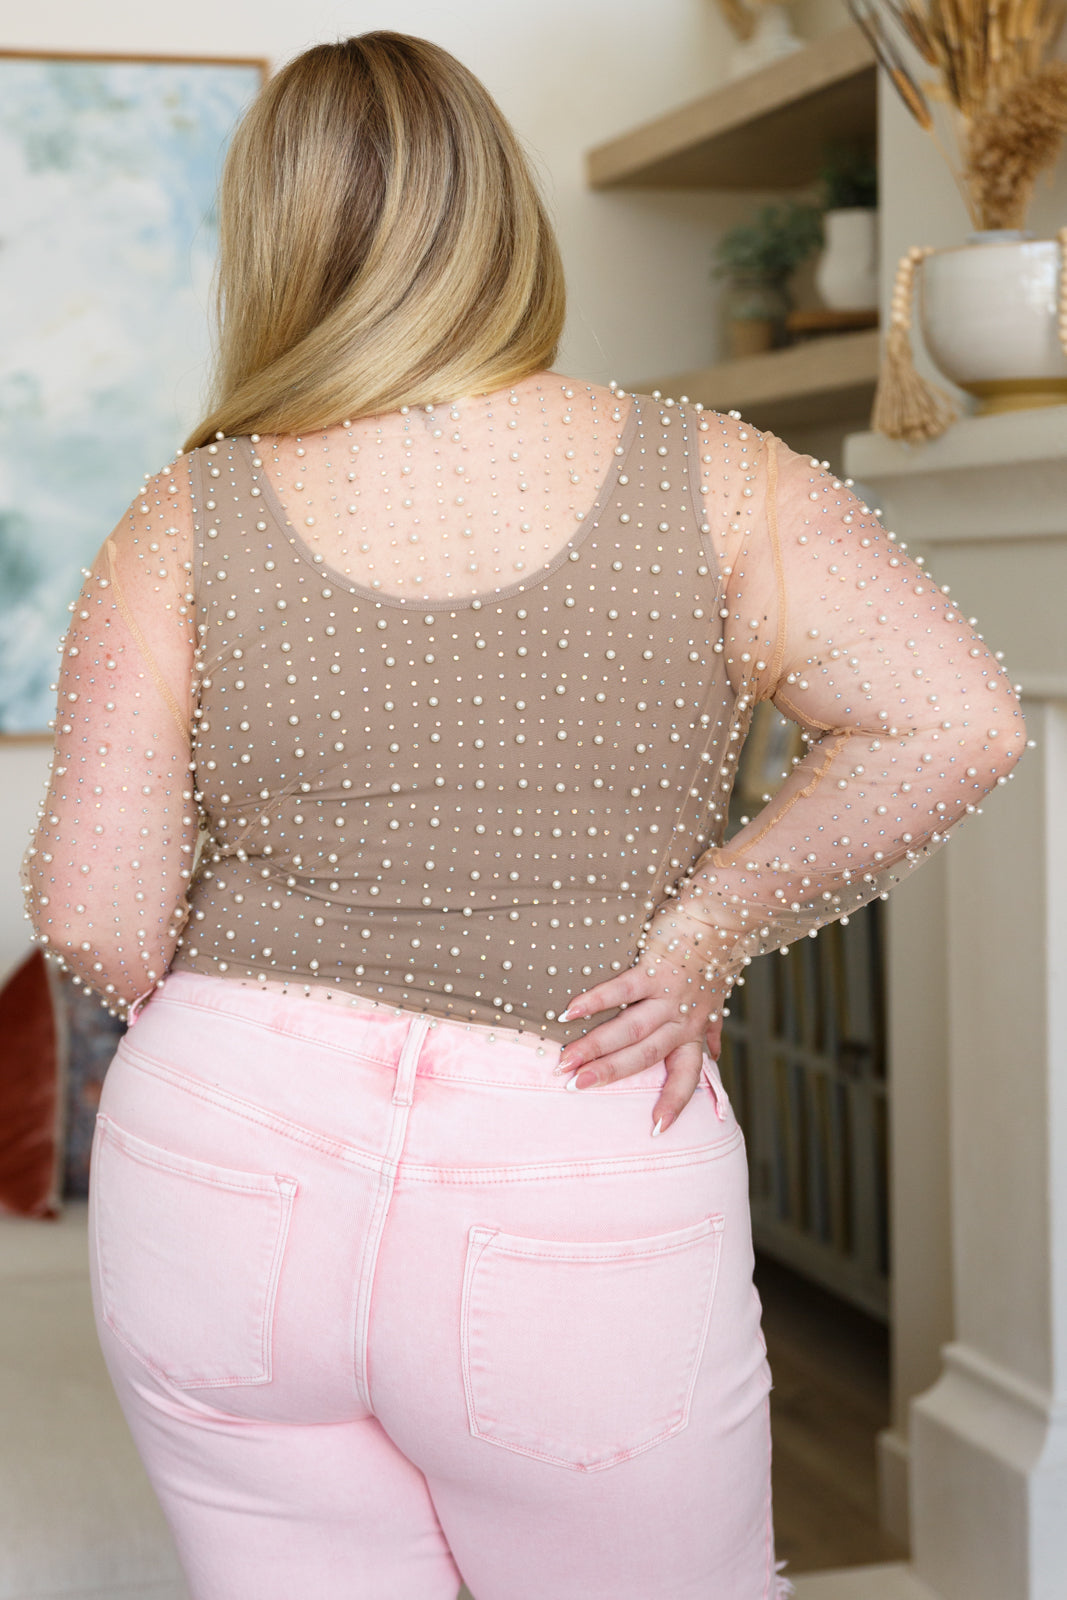 Pearl Perfection Sheer Top in Nude   